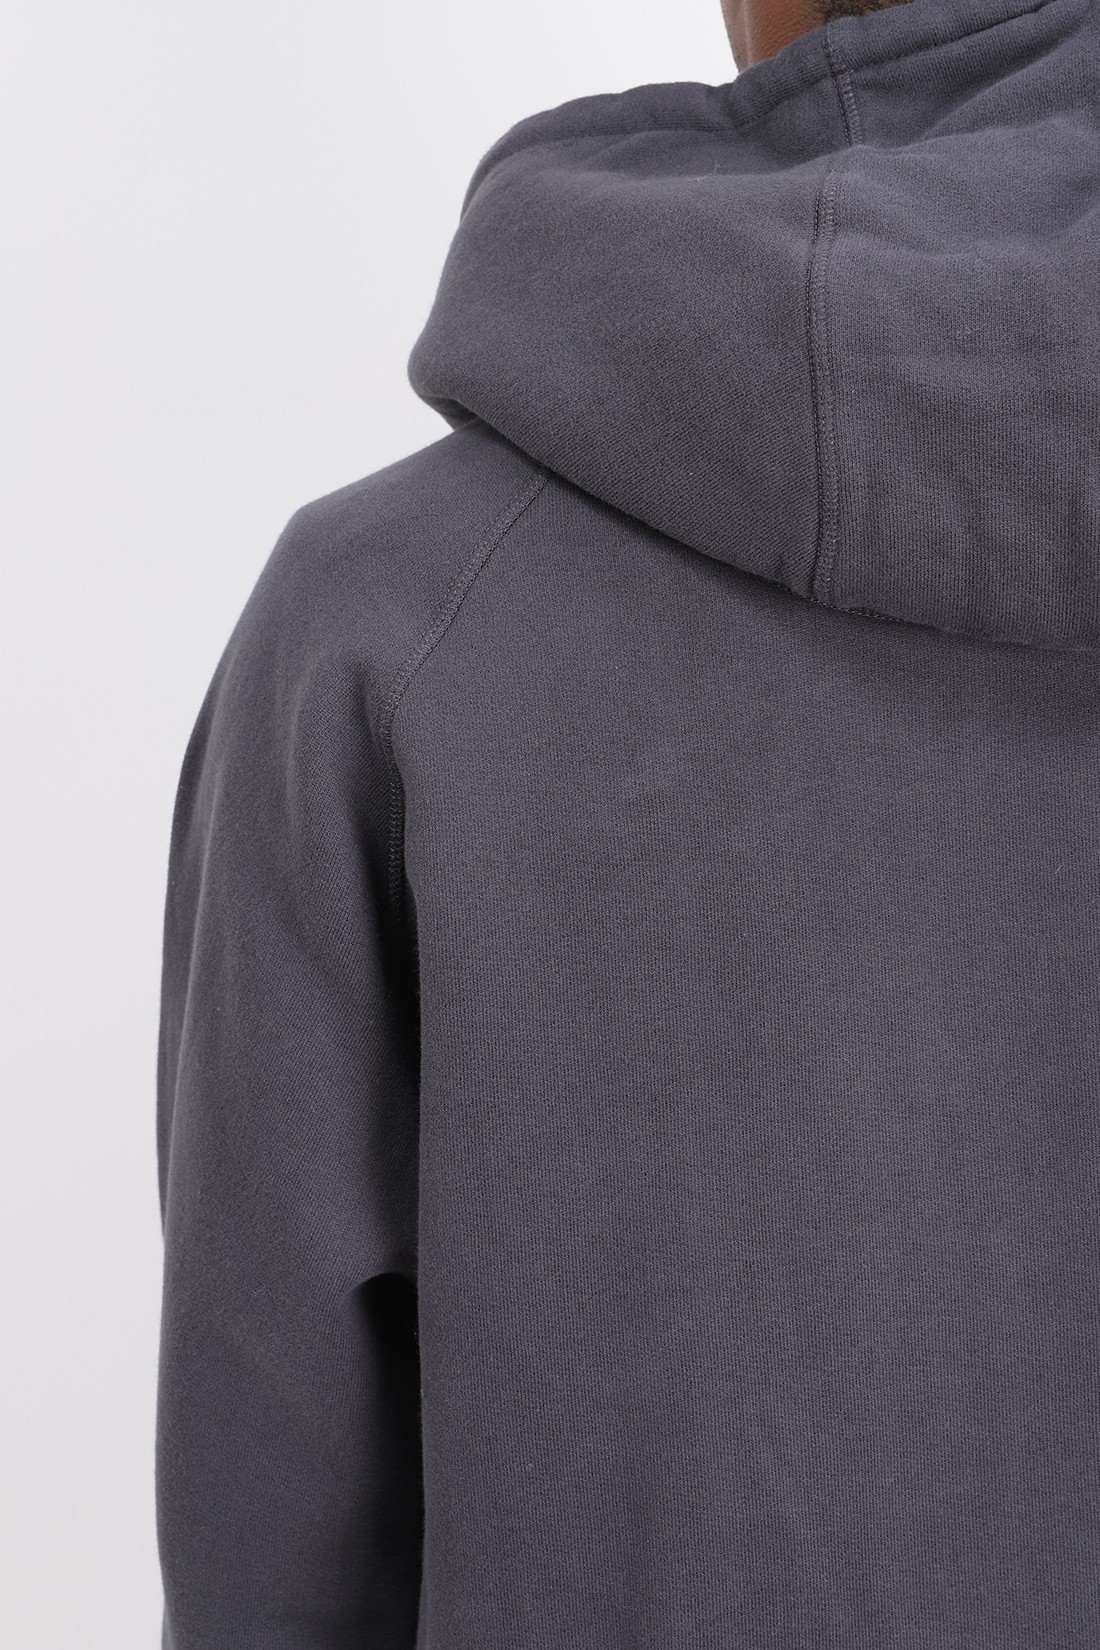 POP TRADING COMPANY / Arch hooded sweat Anthracite